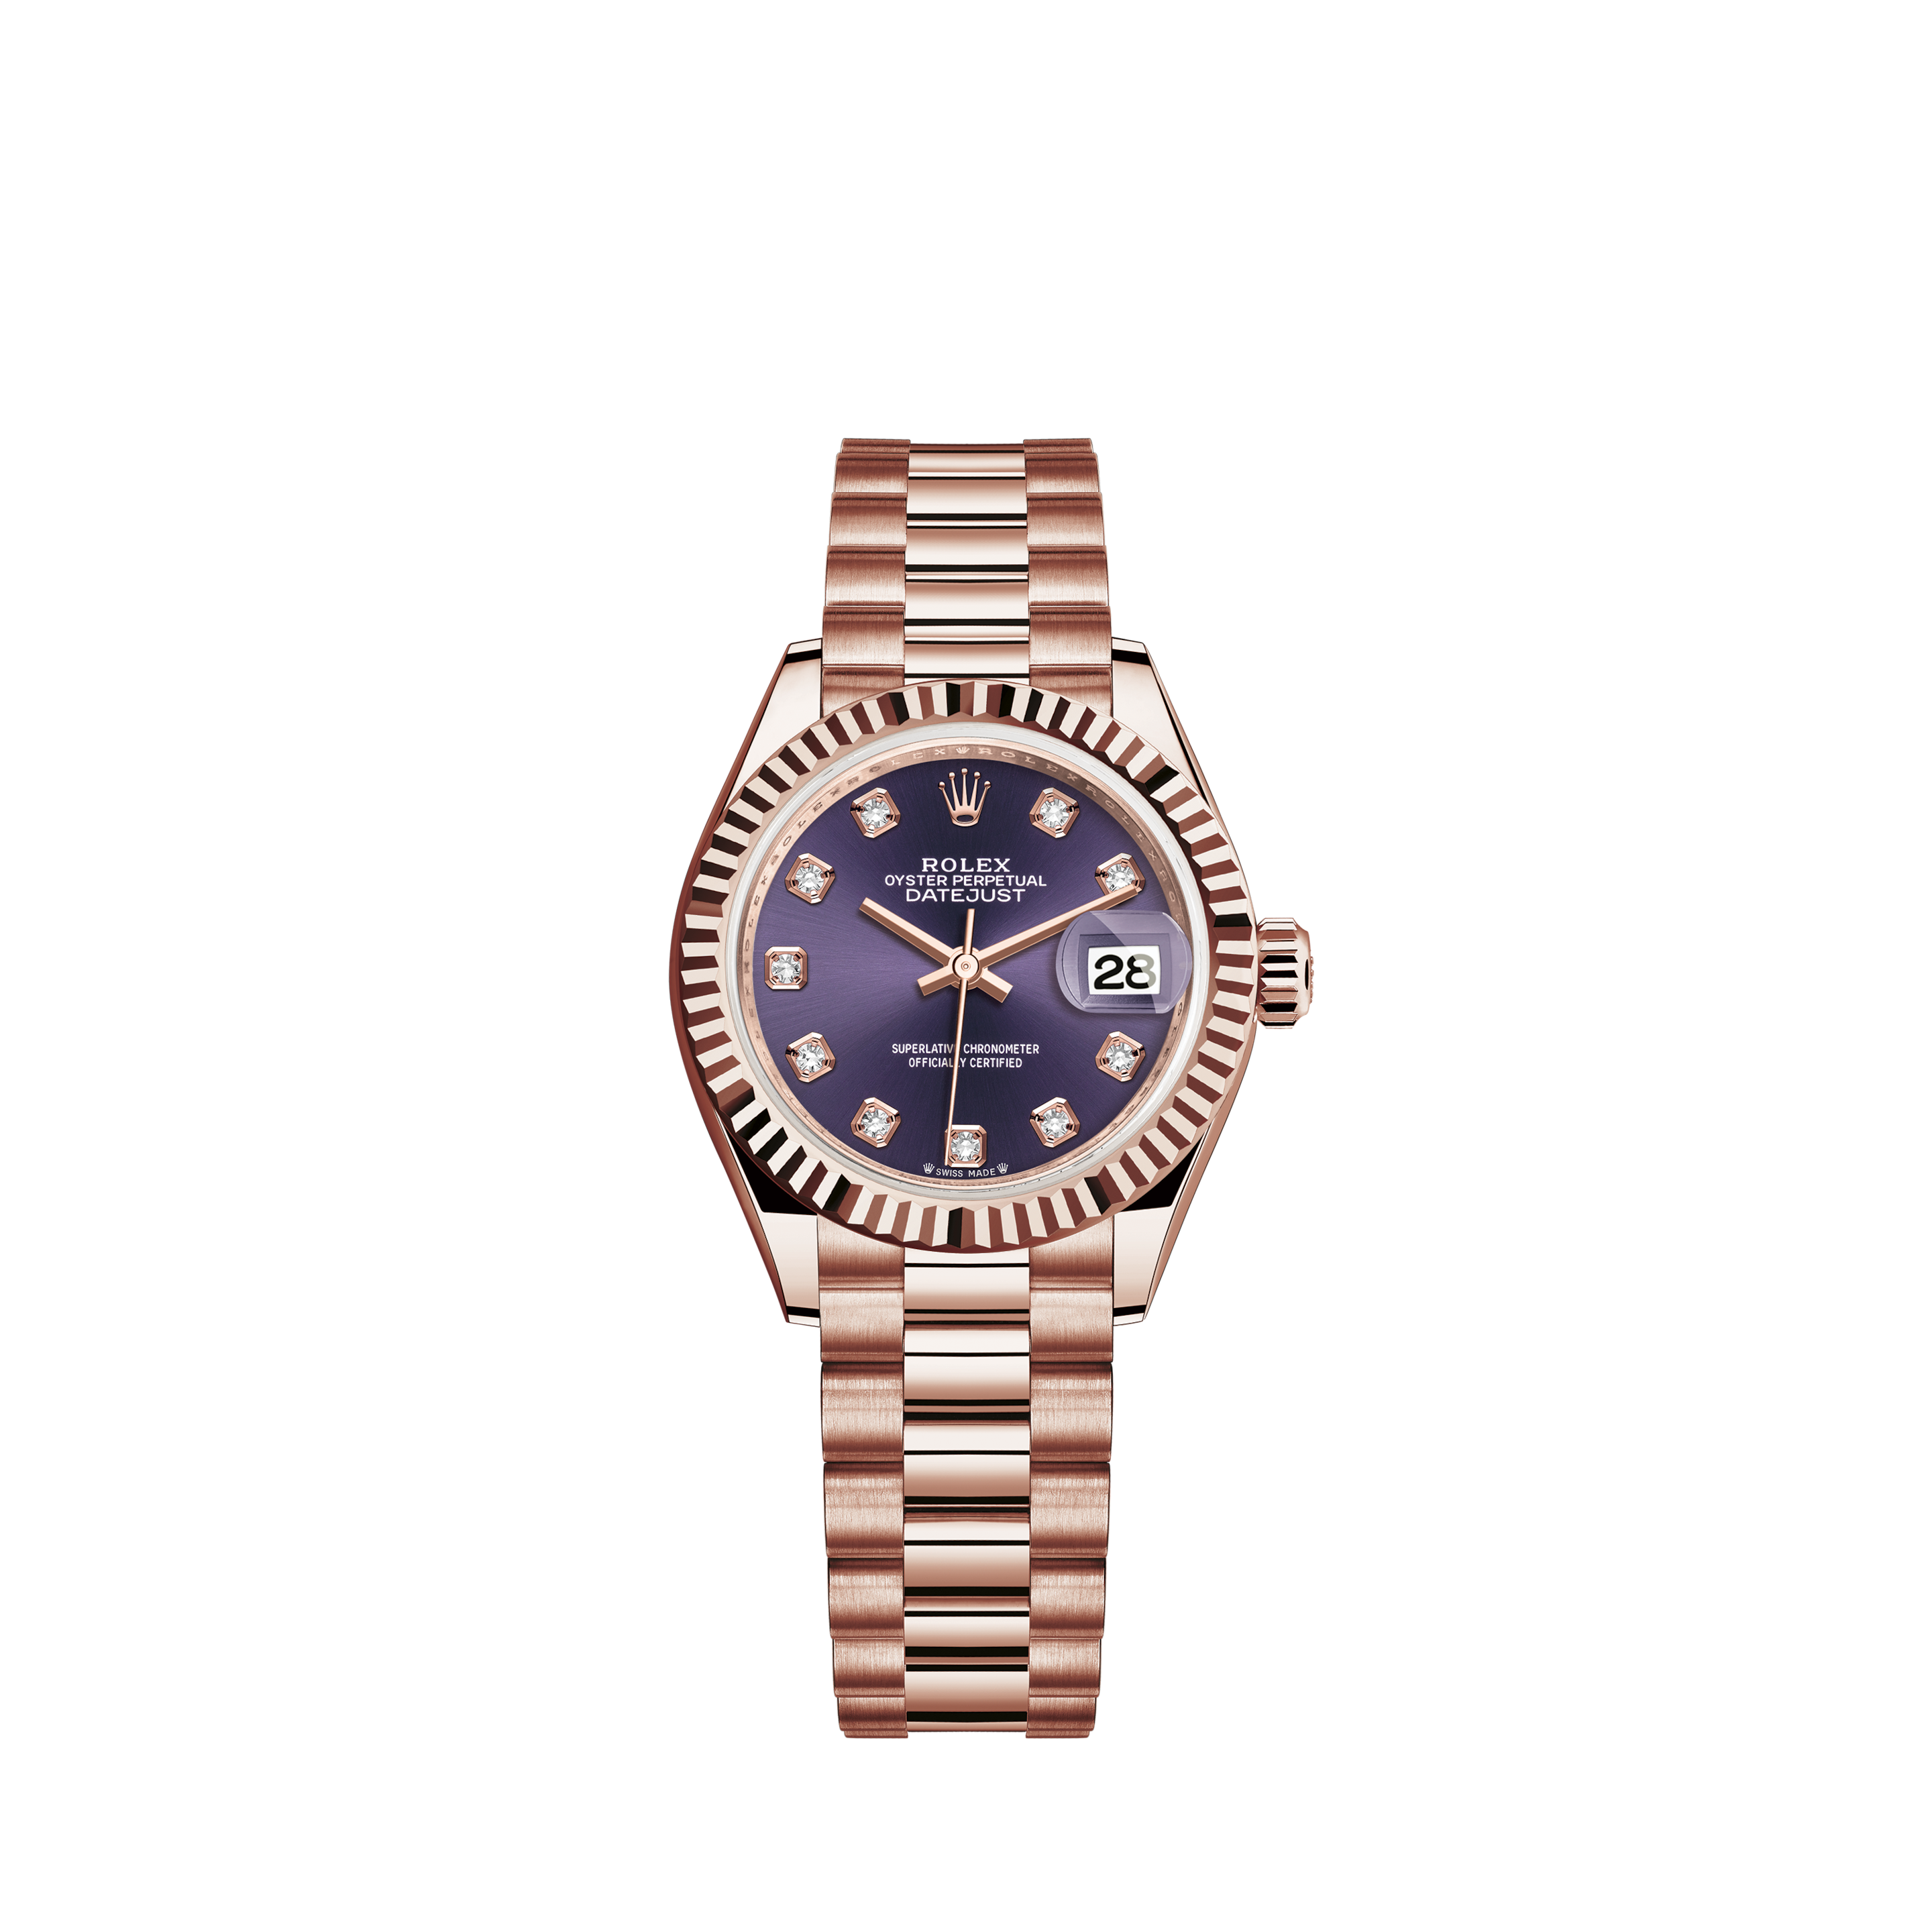 Rolex Oyster Perpetual 36mm Datejust Pearl Diamond Dial with Baguette 6&9 Jubilee Bracelet 1982 year